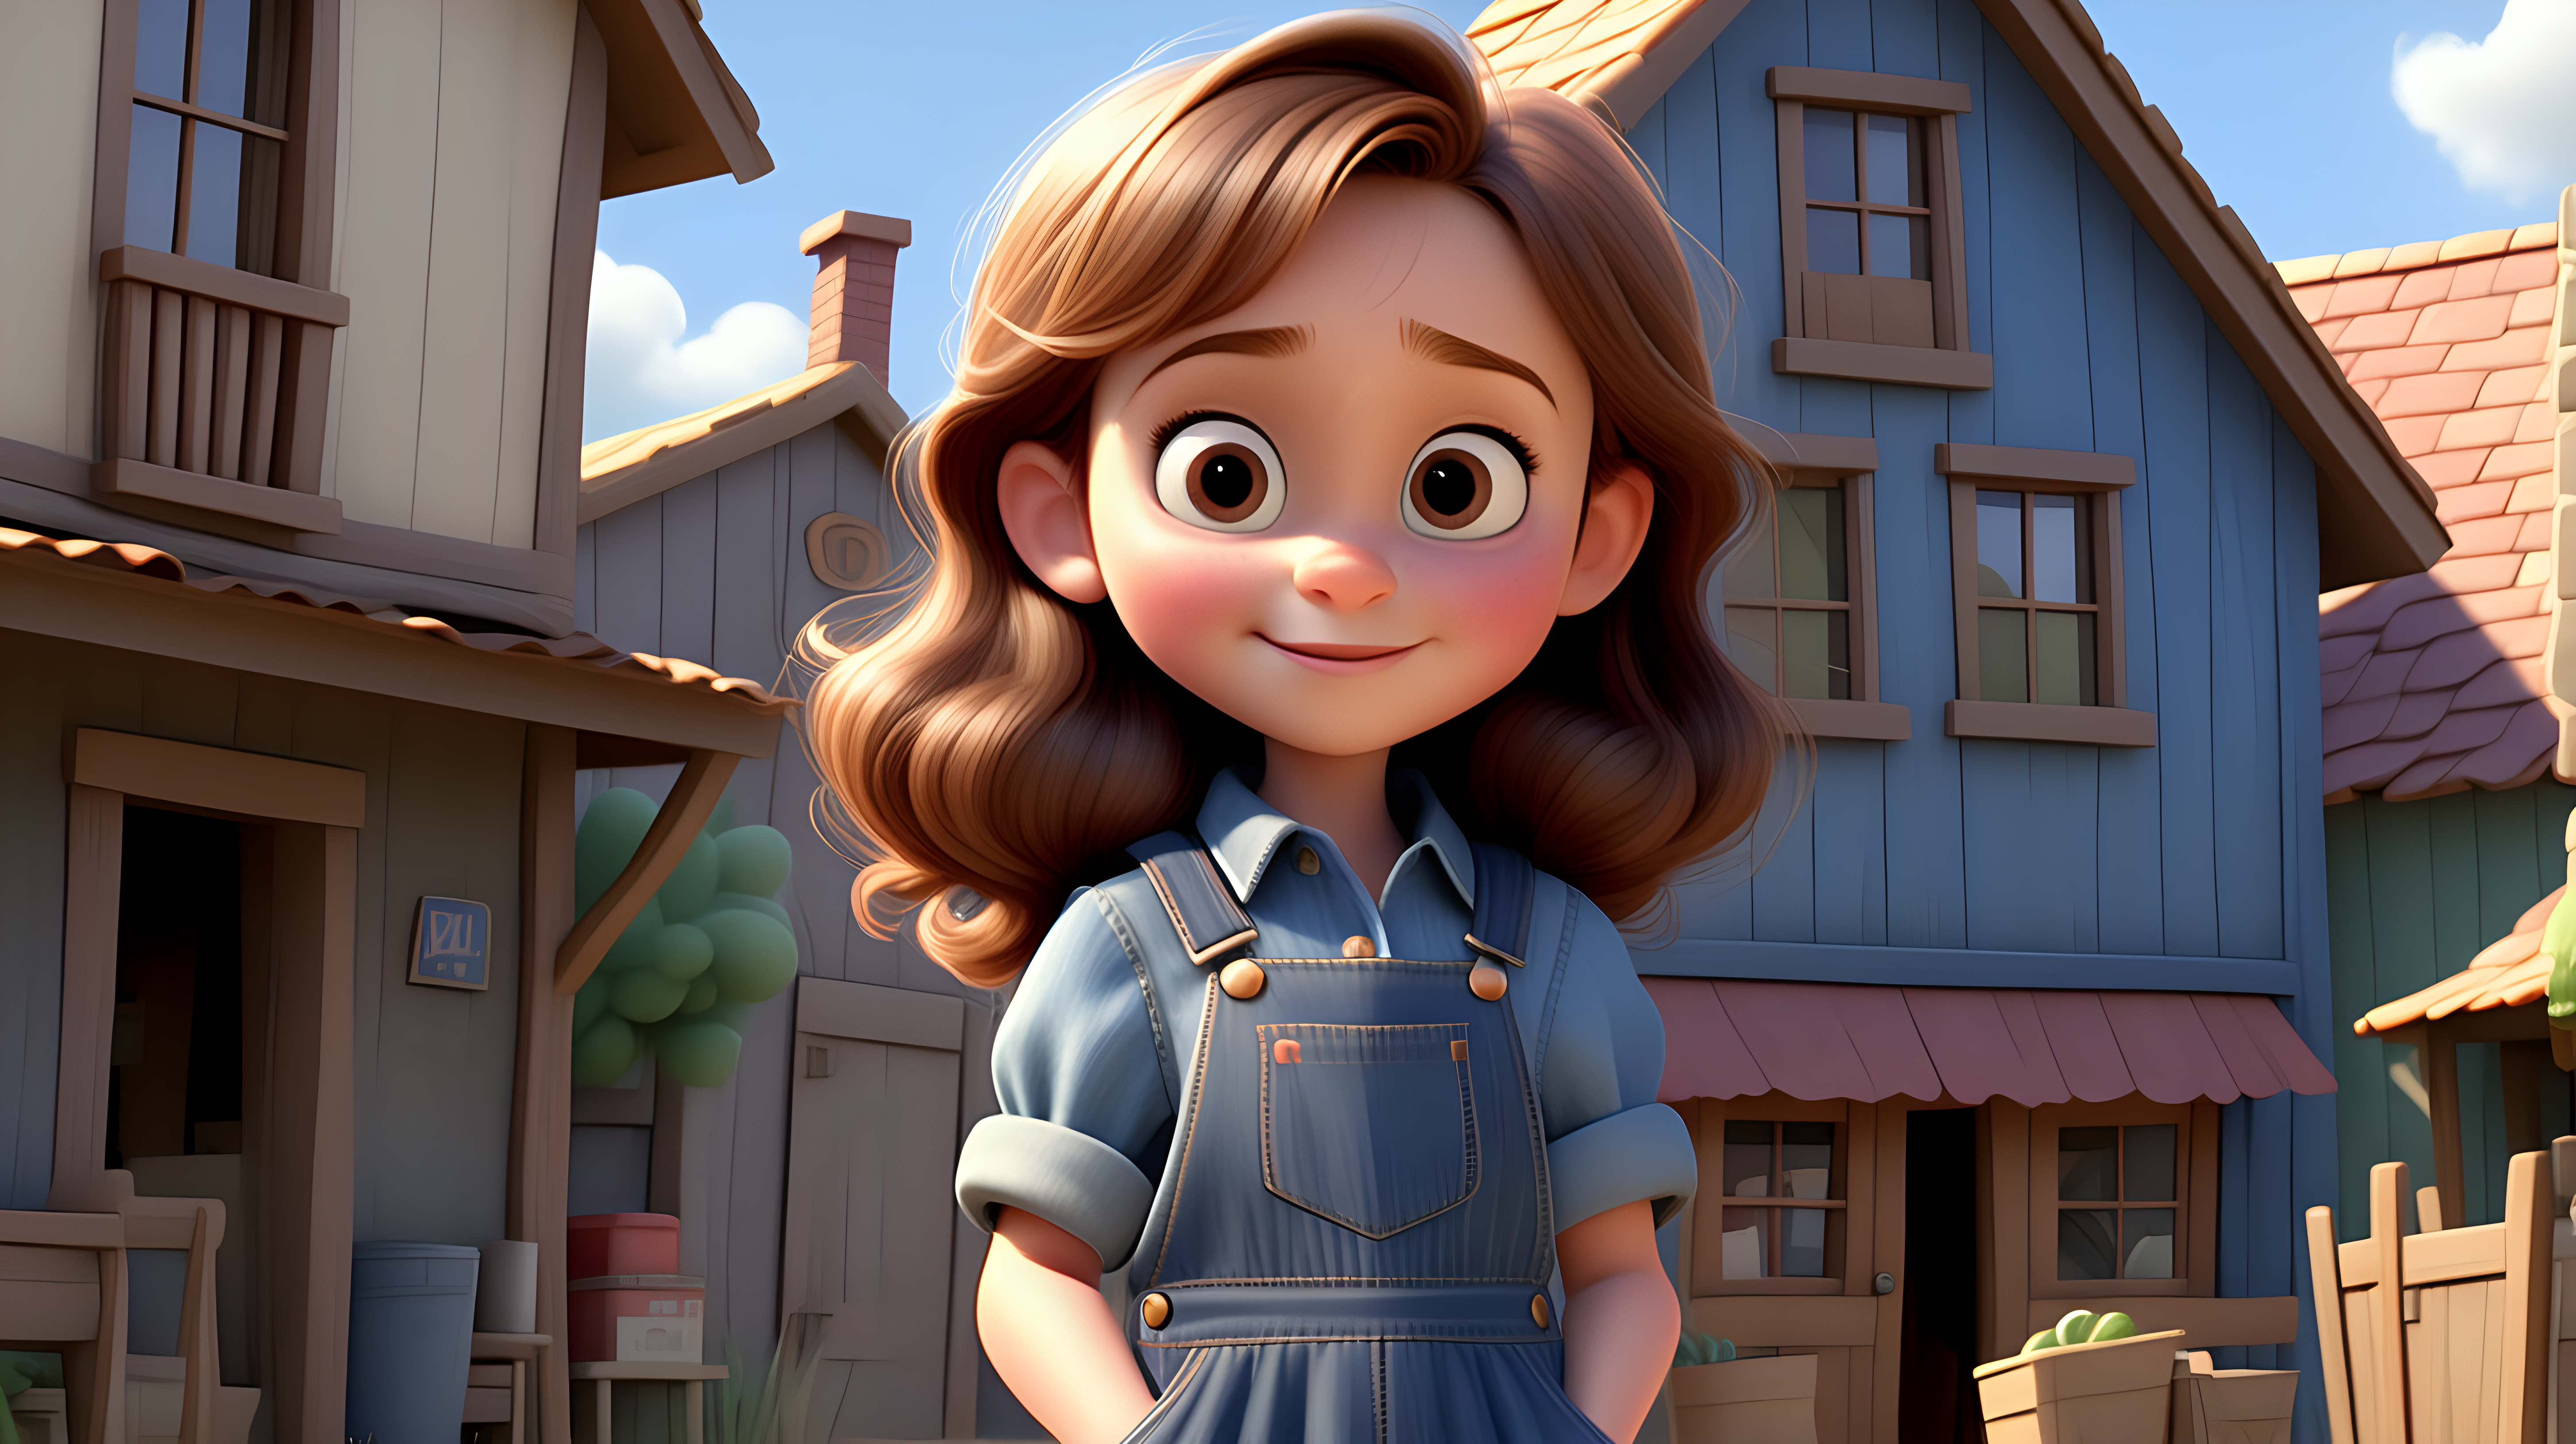 imagine 4 year old small girl with brown hair, fair skin, light brown eyes, wearing a denim dress overall, and a blue shirt, use Pixar style animation, make it full body size, in a village